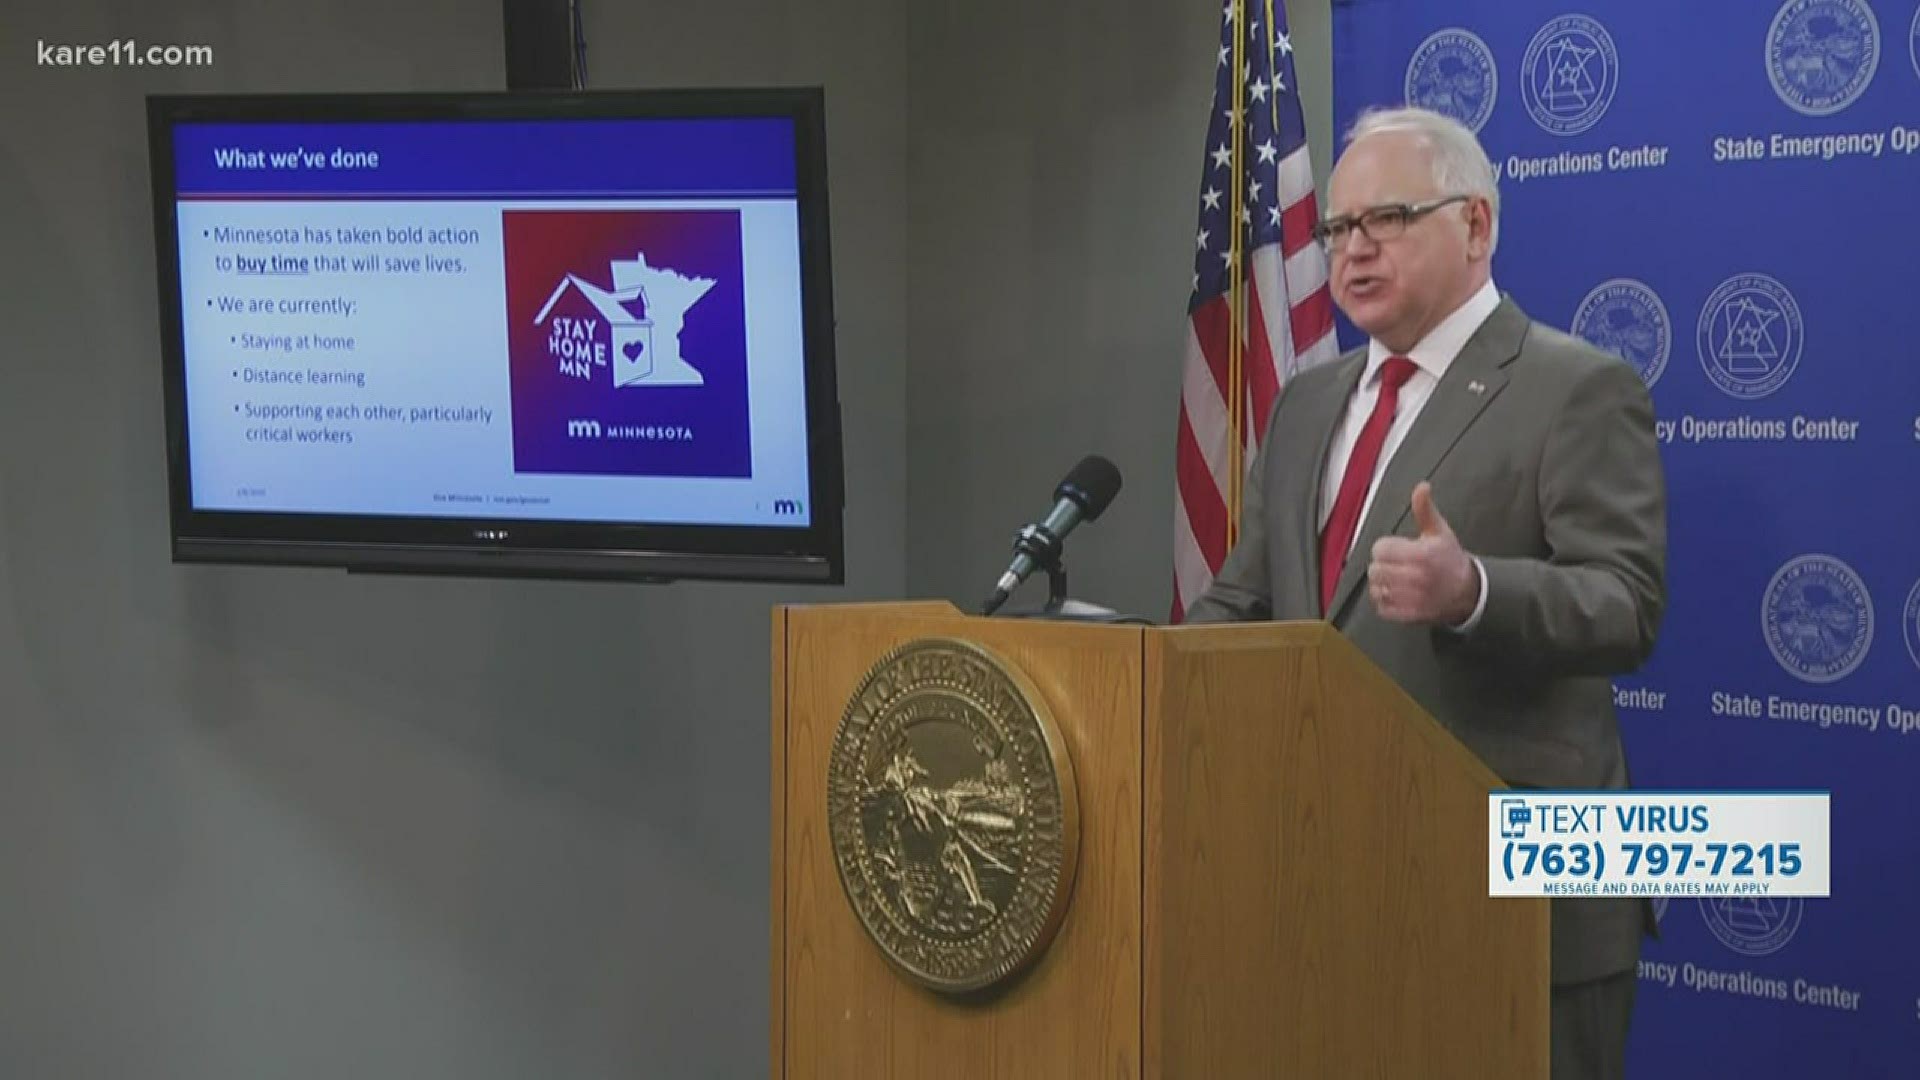 Gov. Walz has extended Minnesota’s stay-at-home order until May 4 as the number of COVID-19 deaths in the state continues to rise.